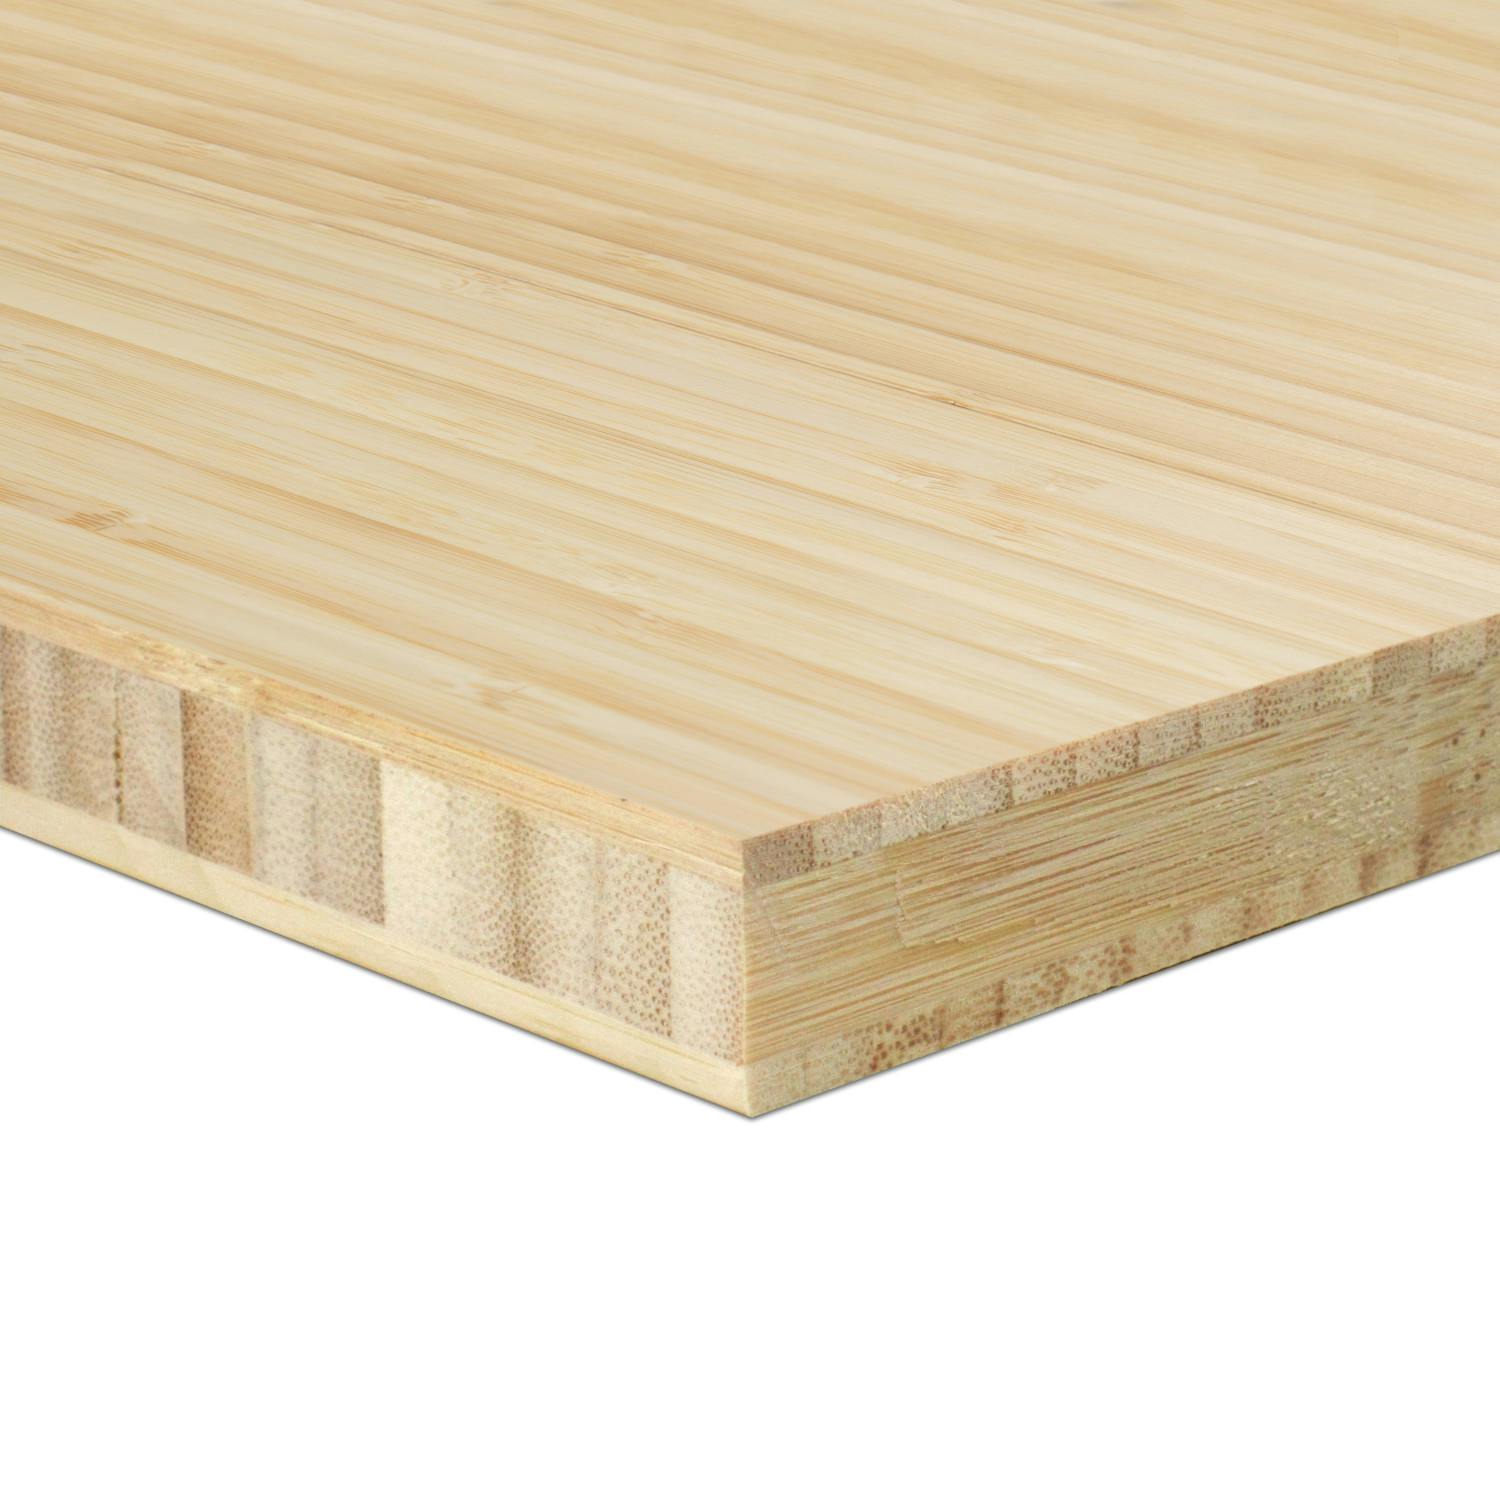 3/4 Inch Natural Vertical Bamboo Plywood - 3 PLY